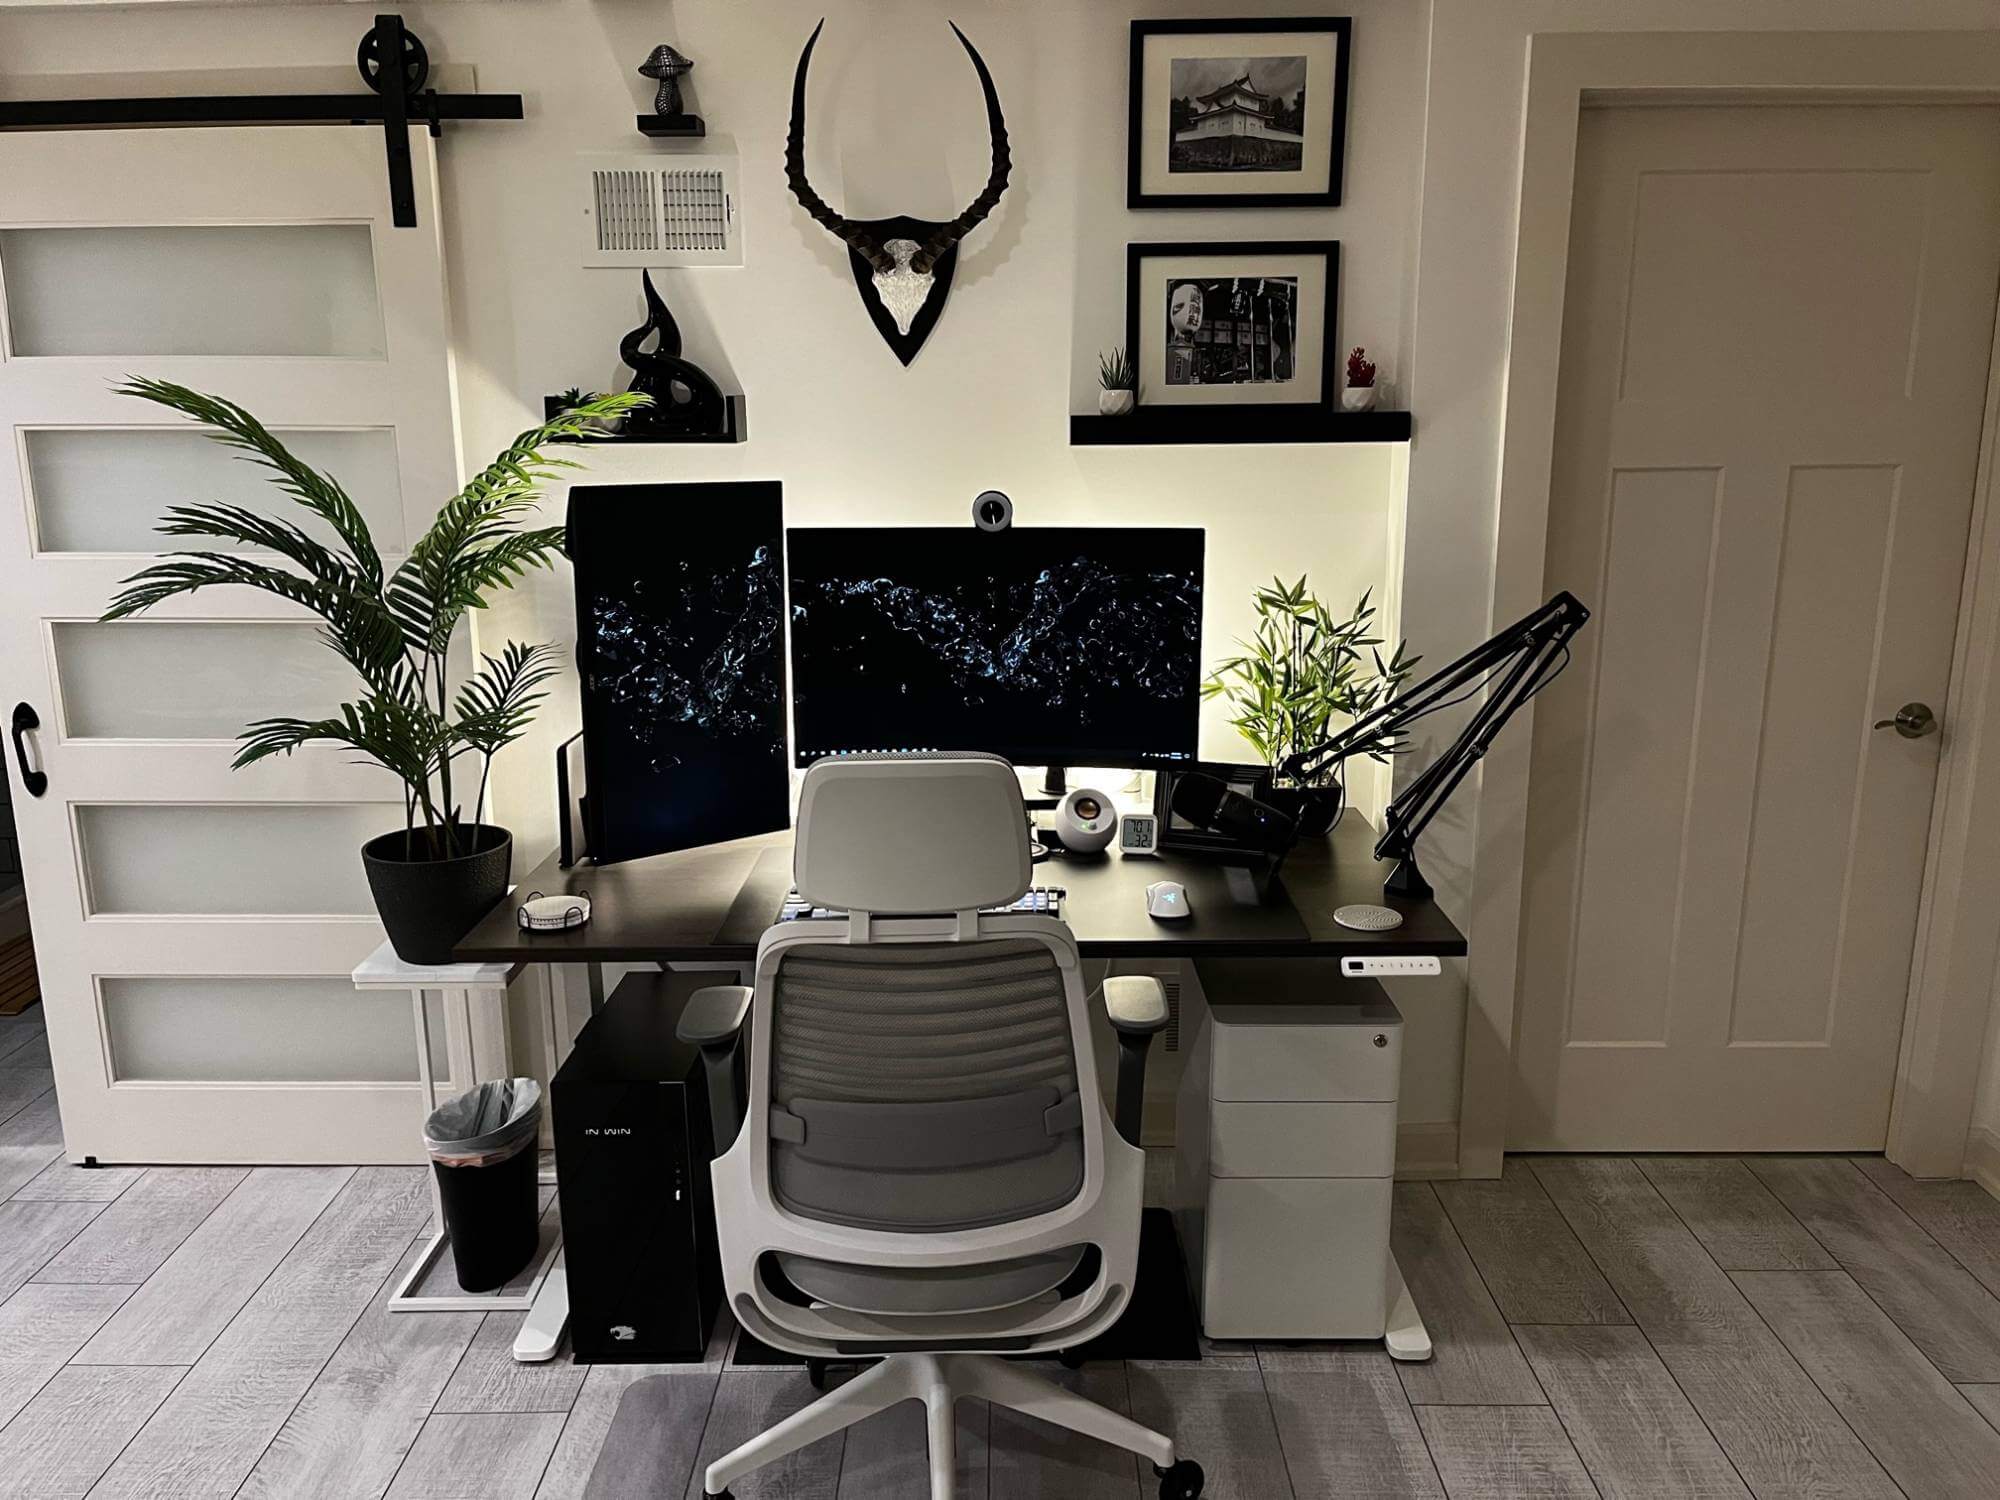 Monochrome workspace featuring the African antelope antlers